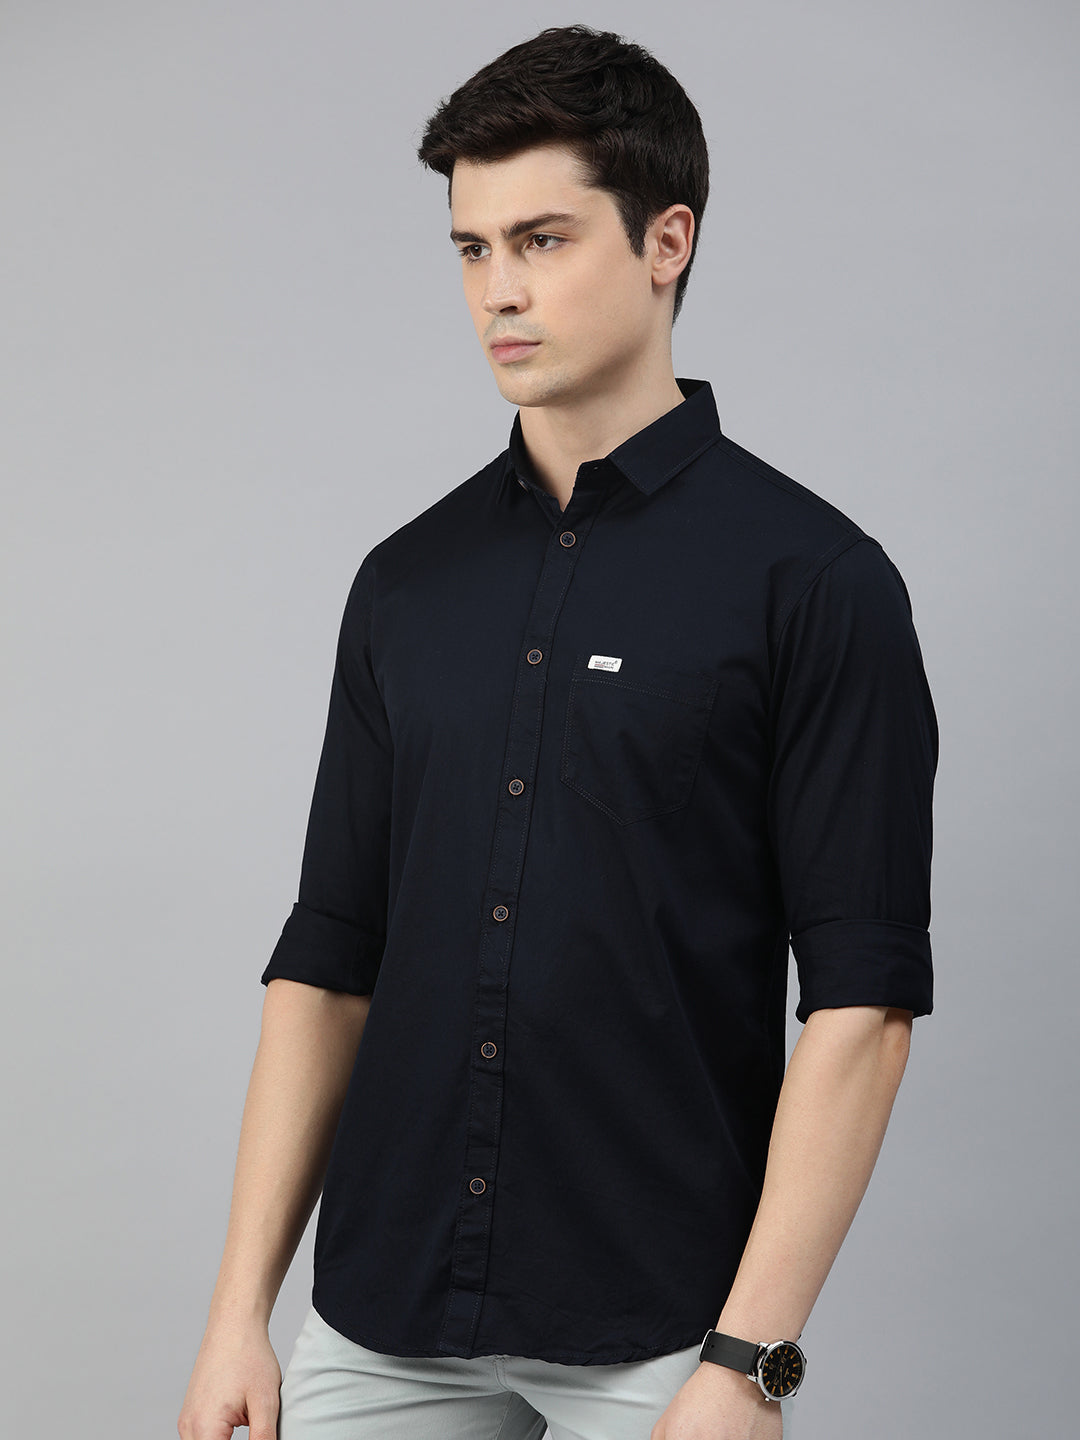 Majestic Man Comfort Slim Fit Solid Cotton Casual Shirt - Navy Blue